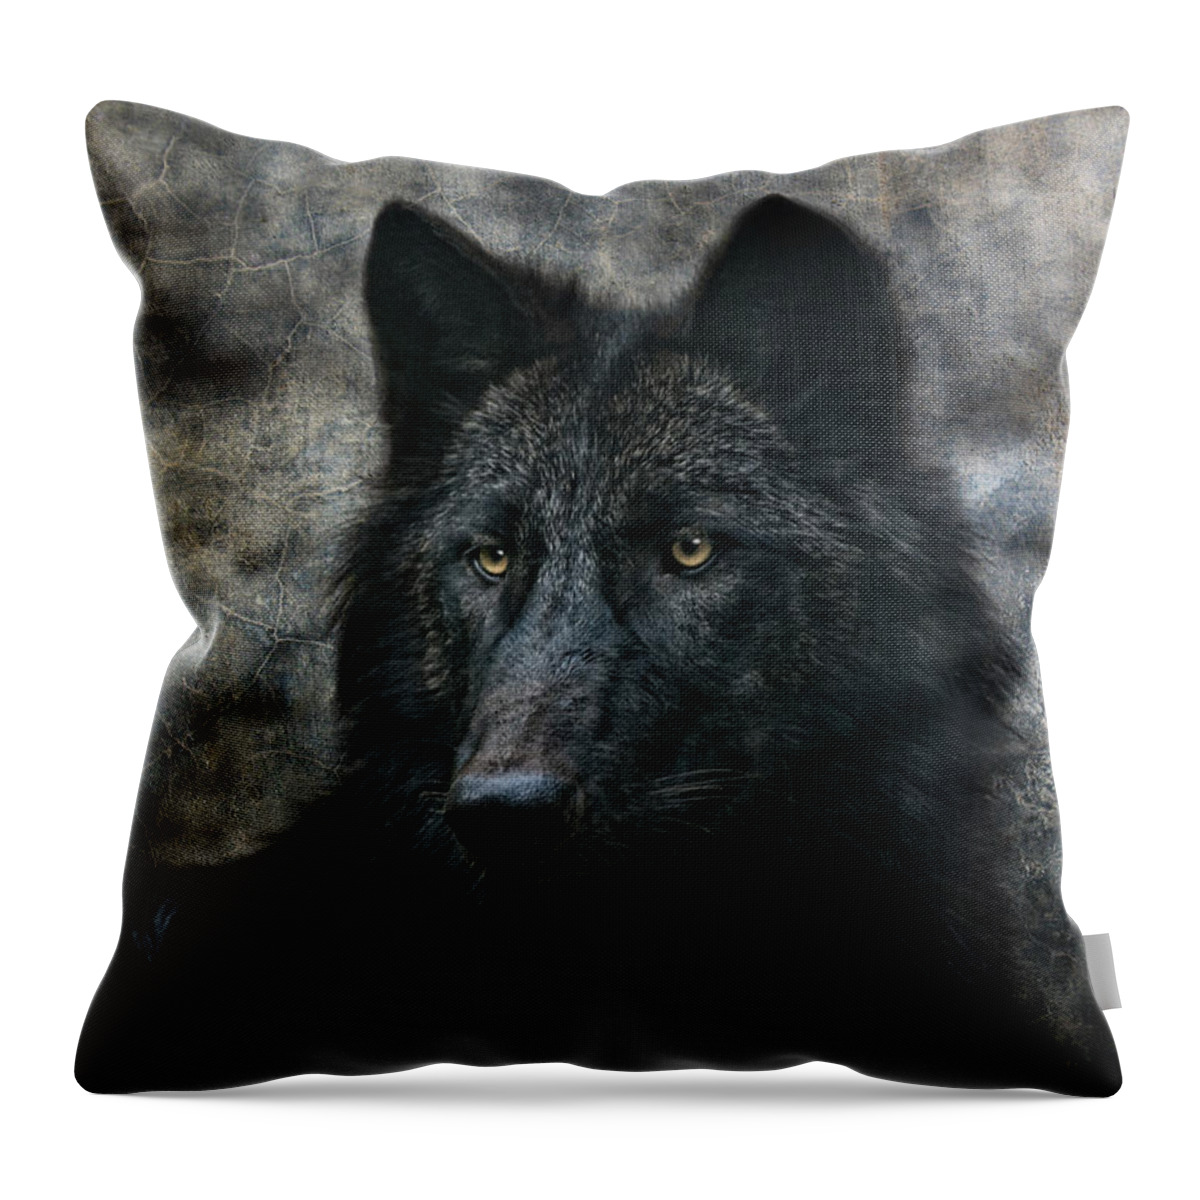 Animal Throw Pillow featuring the photograph The Black Wolf by Joachim G Pinkawa